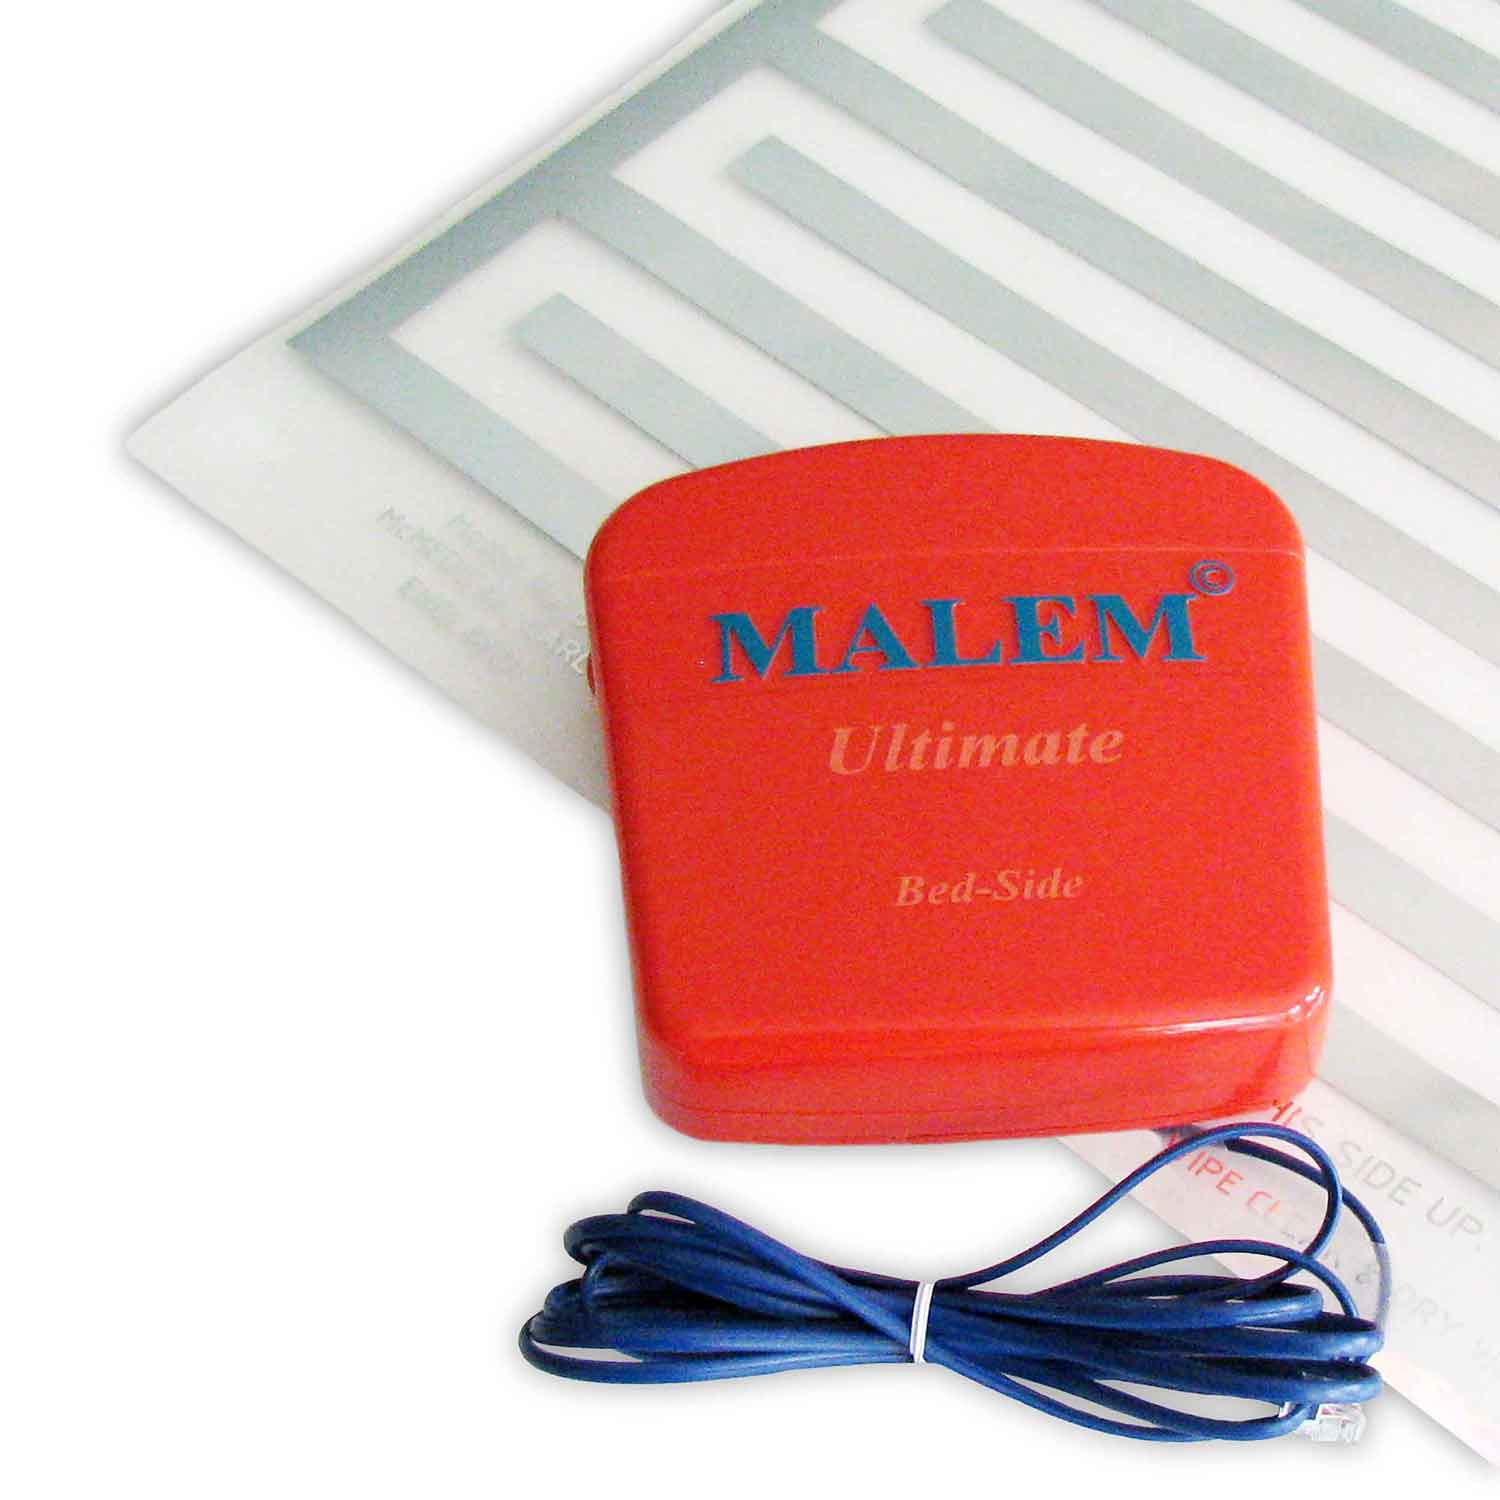 Malem Bed-Side Bedwetting Alarm with Pad